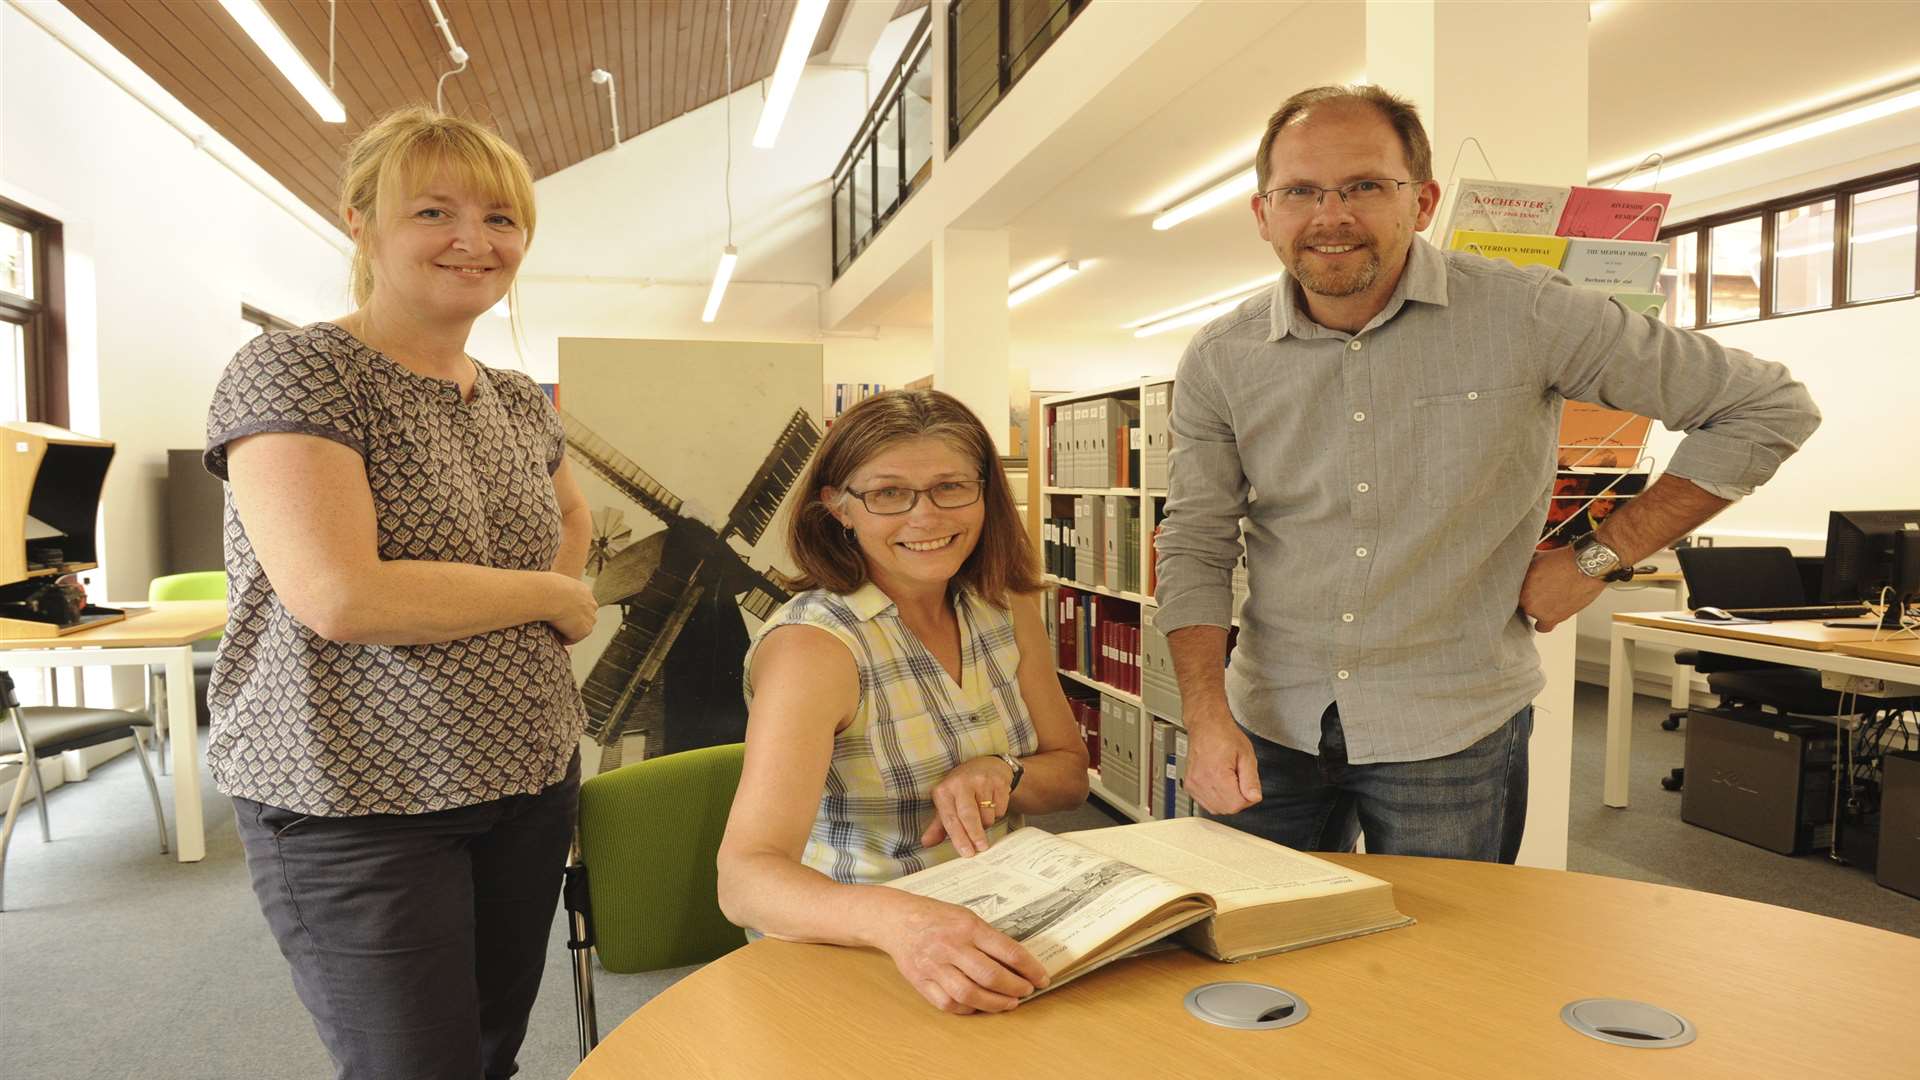 Staff at the new archives centre will be opening to the public on Tuesday.